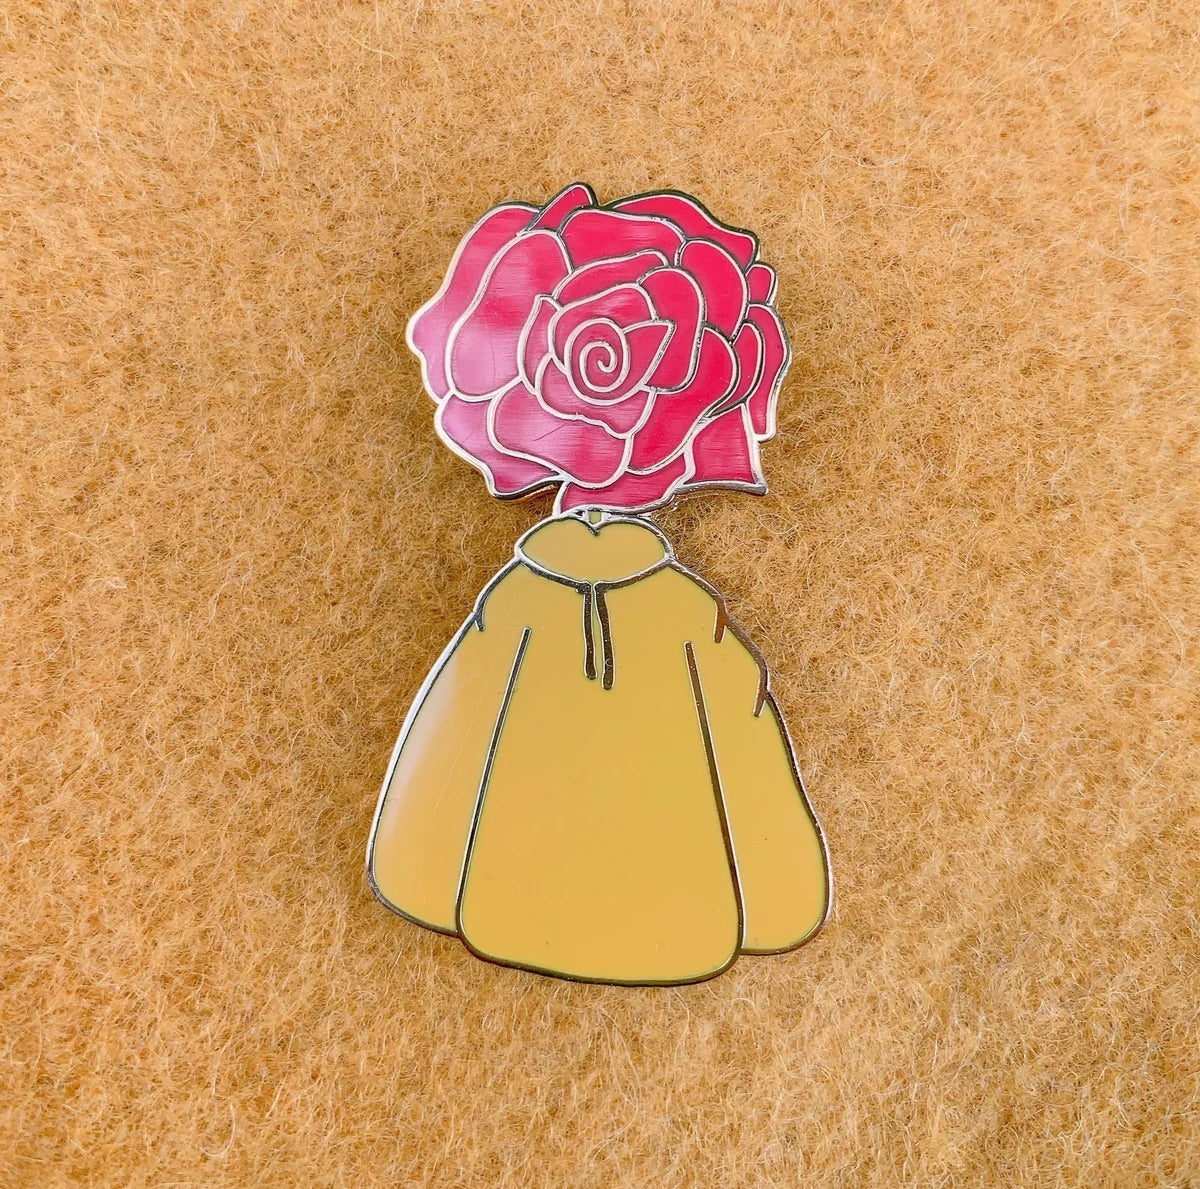 Rose Colored Boy Pins